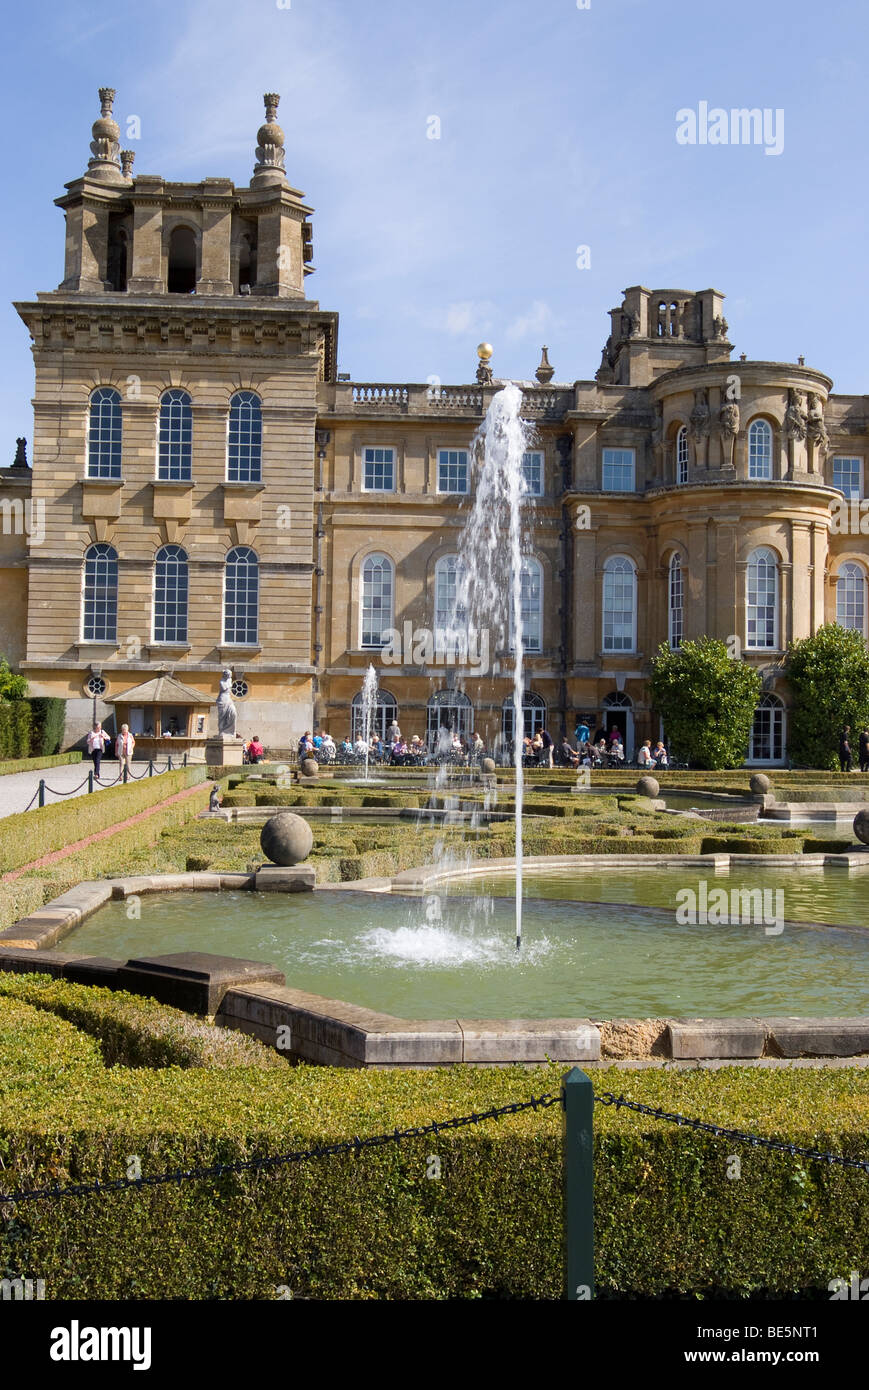 Part of Famous Water Terrace and Fountain in Formal Gardens at Blenheim Palace Woodstock Oxfordshire England United Kingdom UK Stock Photo